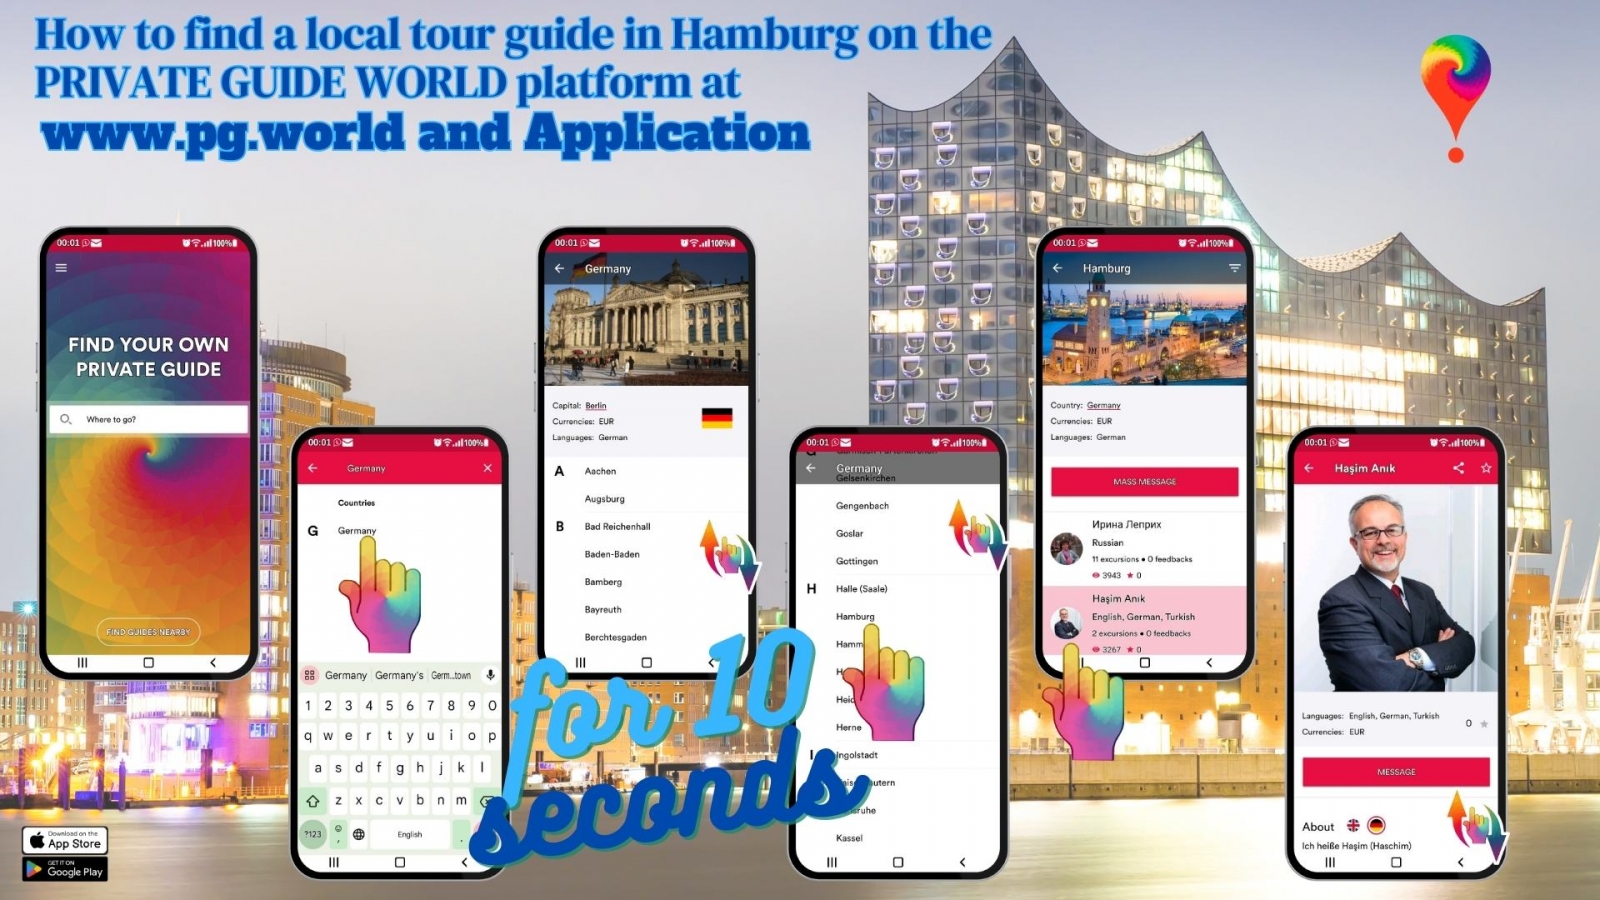 How to find a local tour guide in Hamburg on the PRIVATE GUIDE WORLD platform